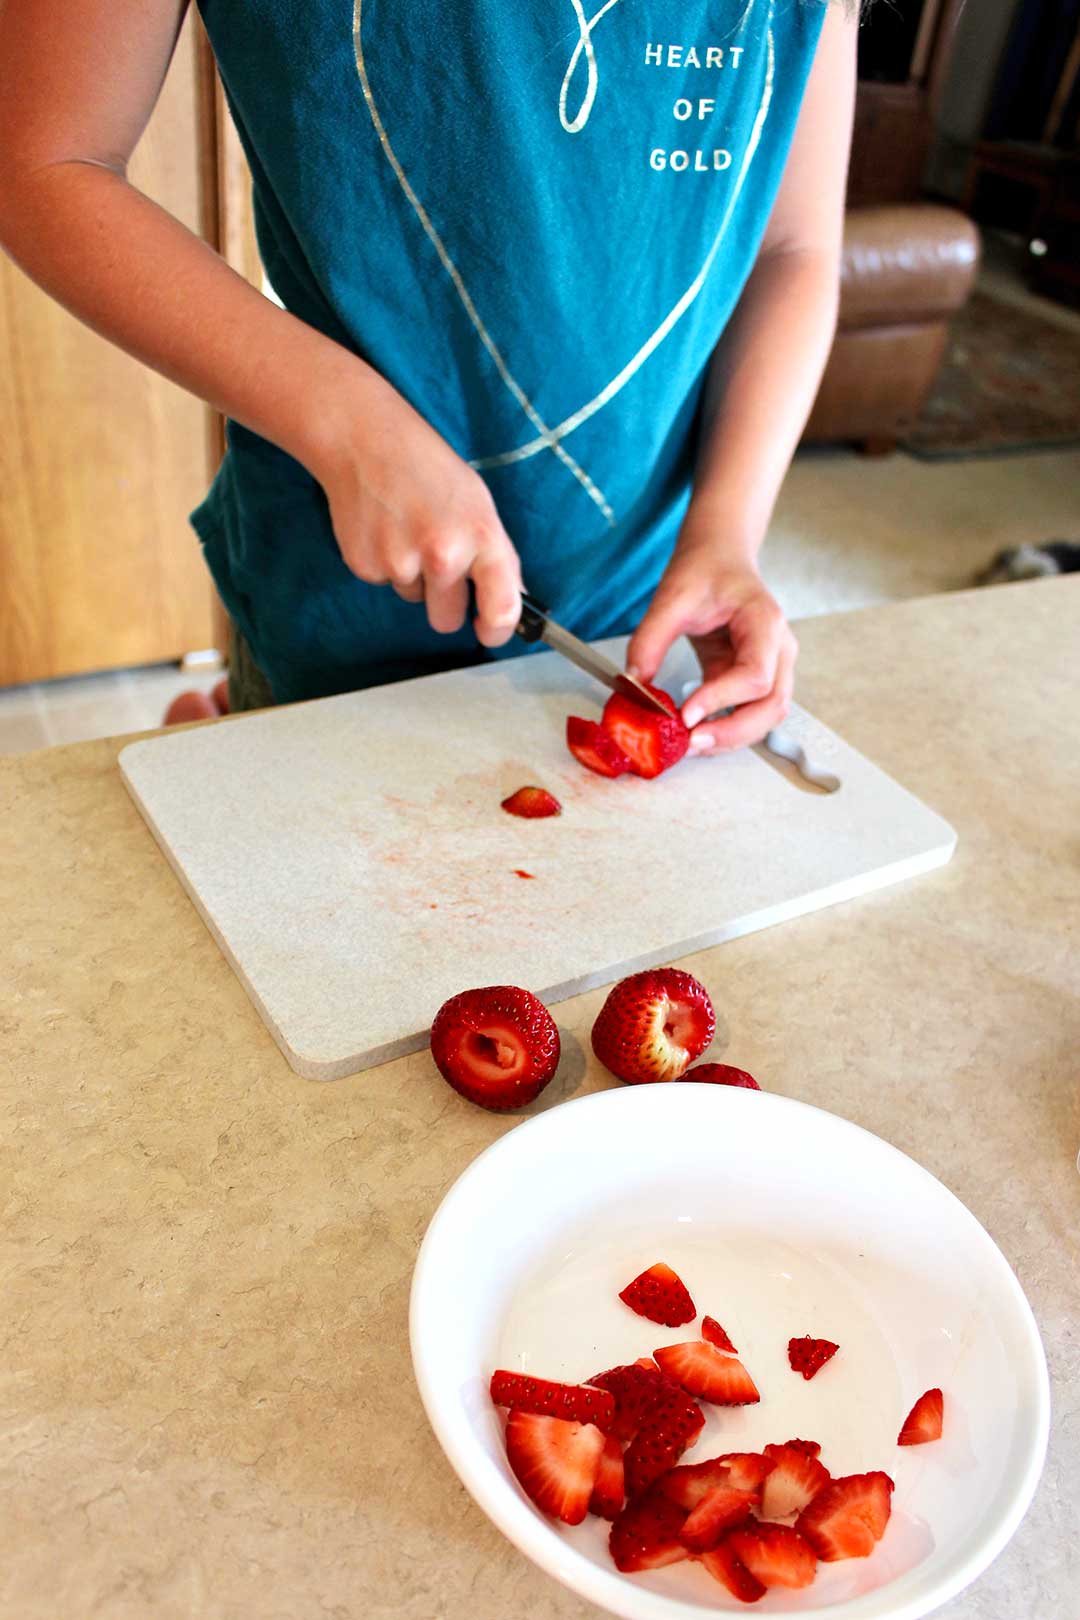 A child slicing strawberries on a cutting board.